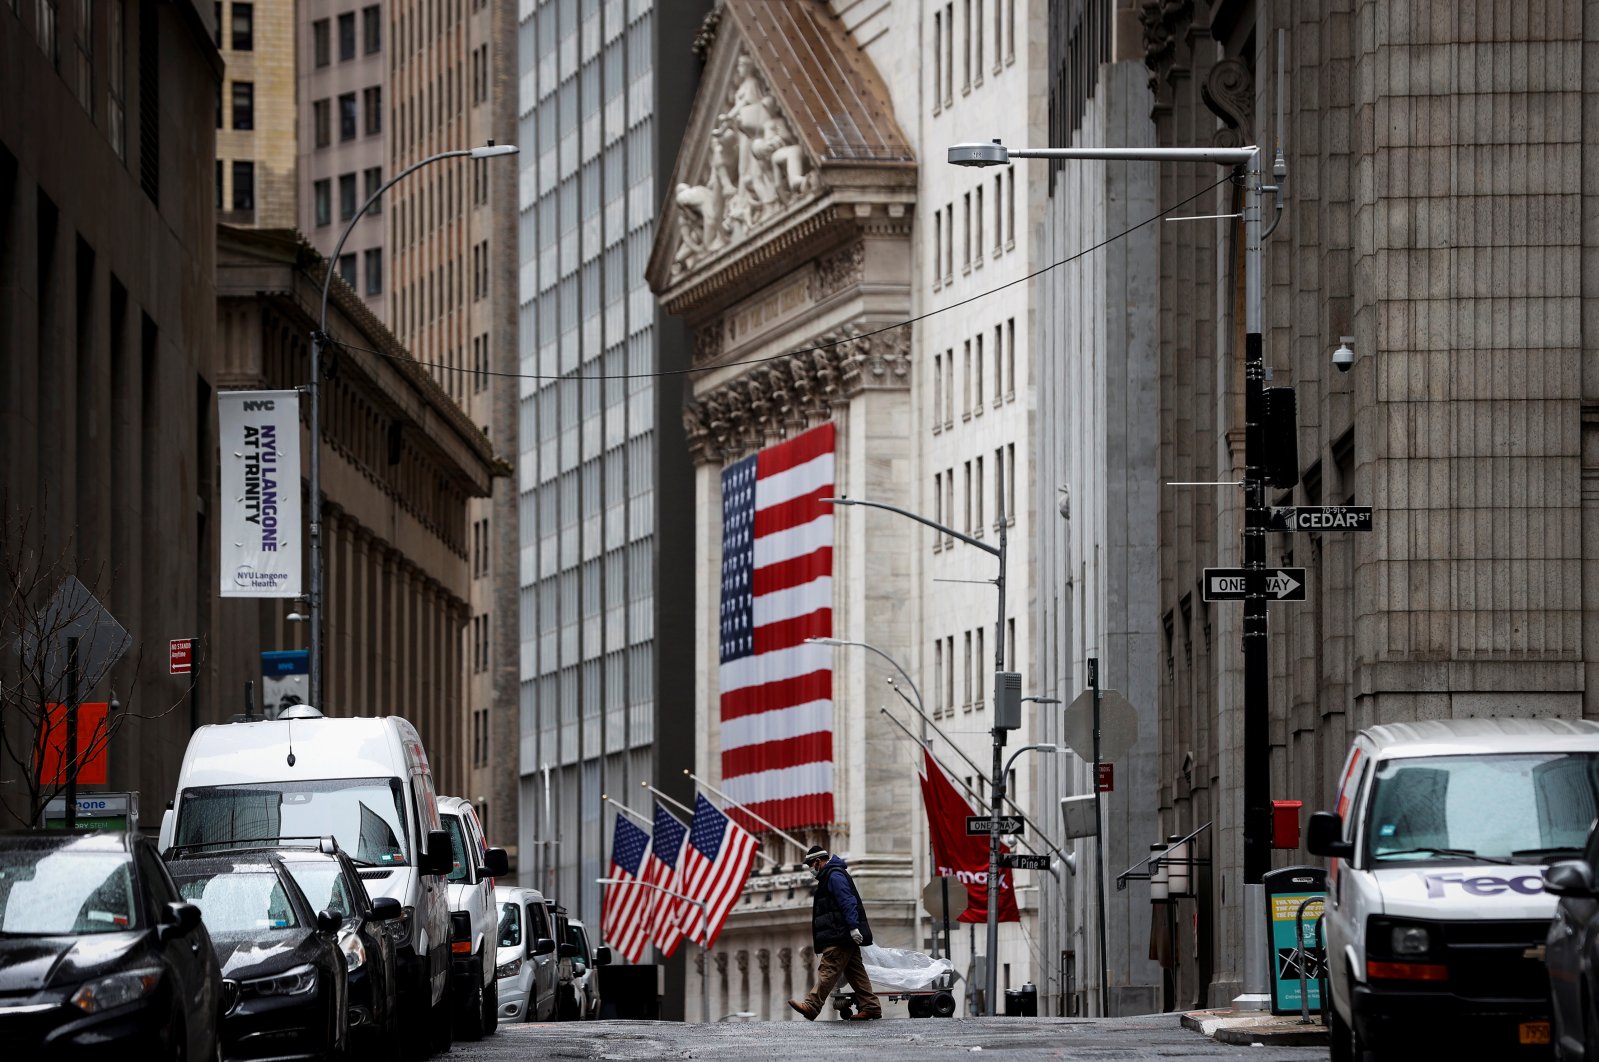 A man crosses a nearly deserted Nassau Street in front of the New York Stock Exchange (NYSE) in the financial district of lower Manhattan during the outbreak of COVID-19 in New York City, New York, U.S., Friday, April 3, 2020. (Reuters Photo)